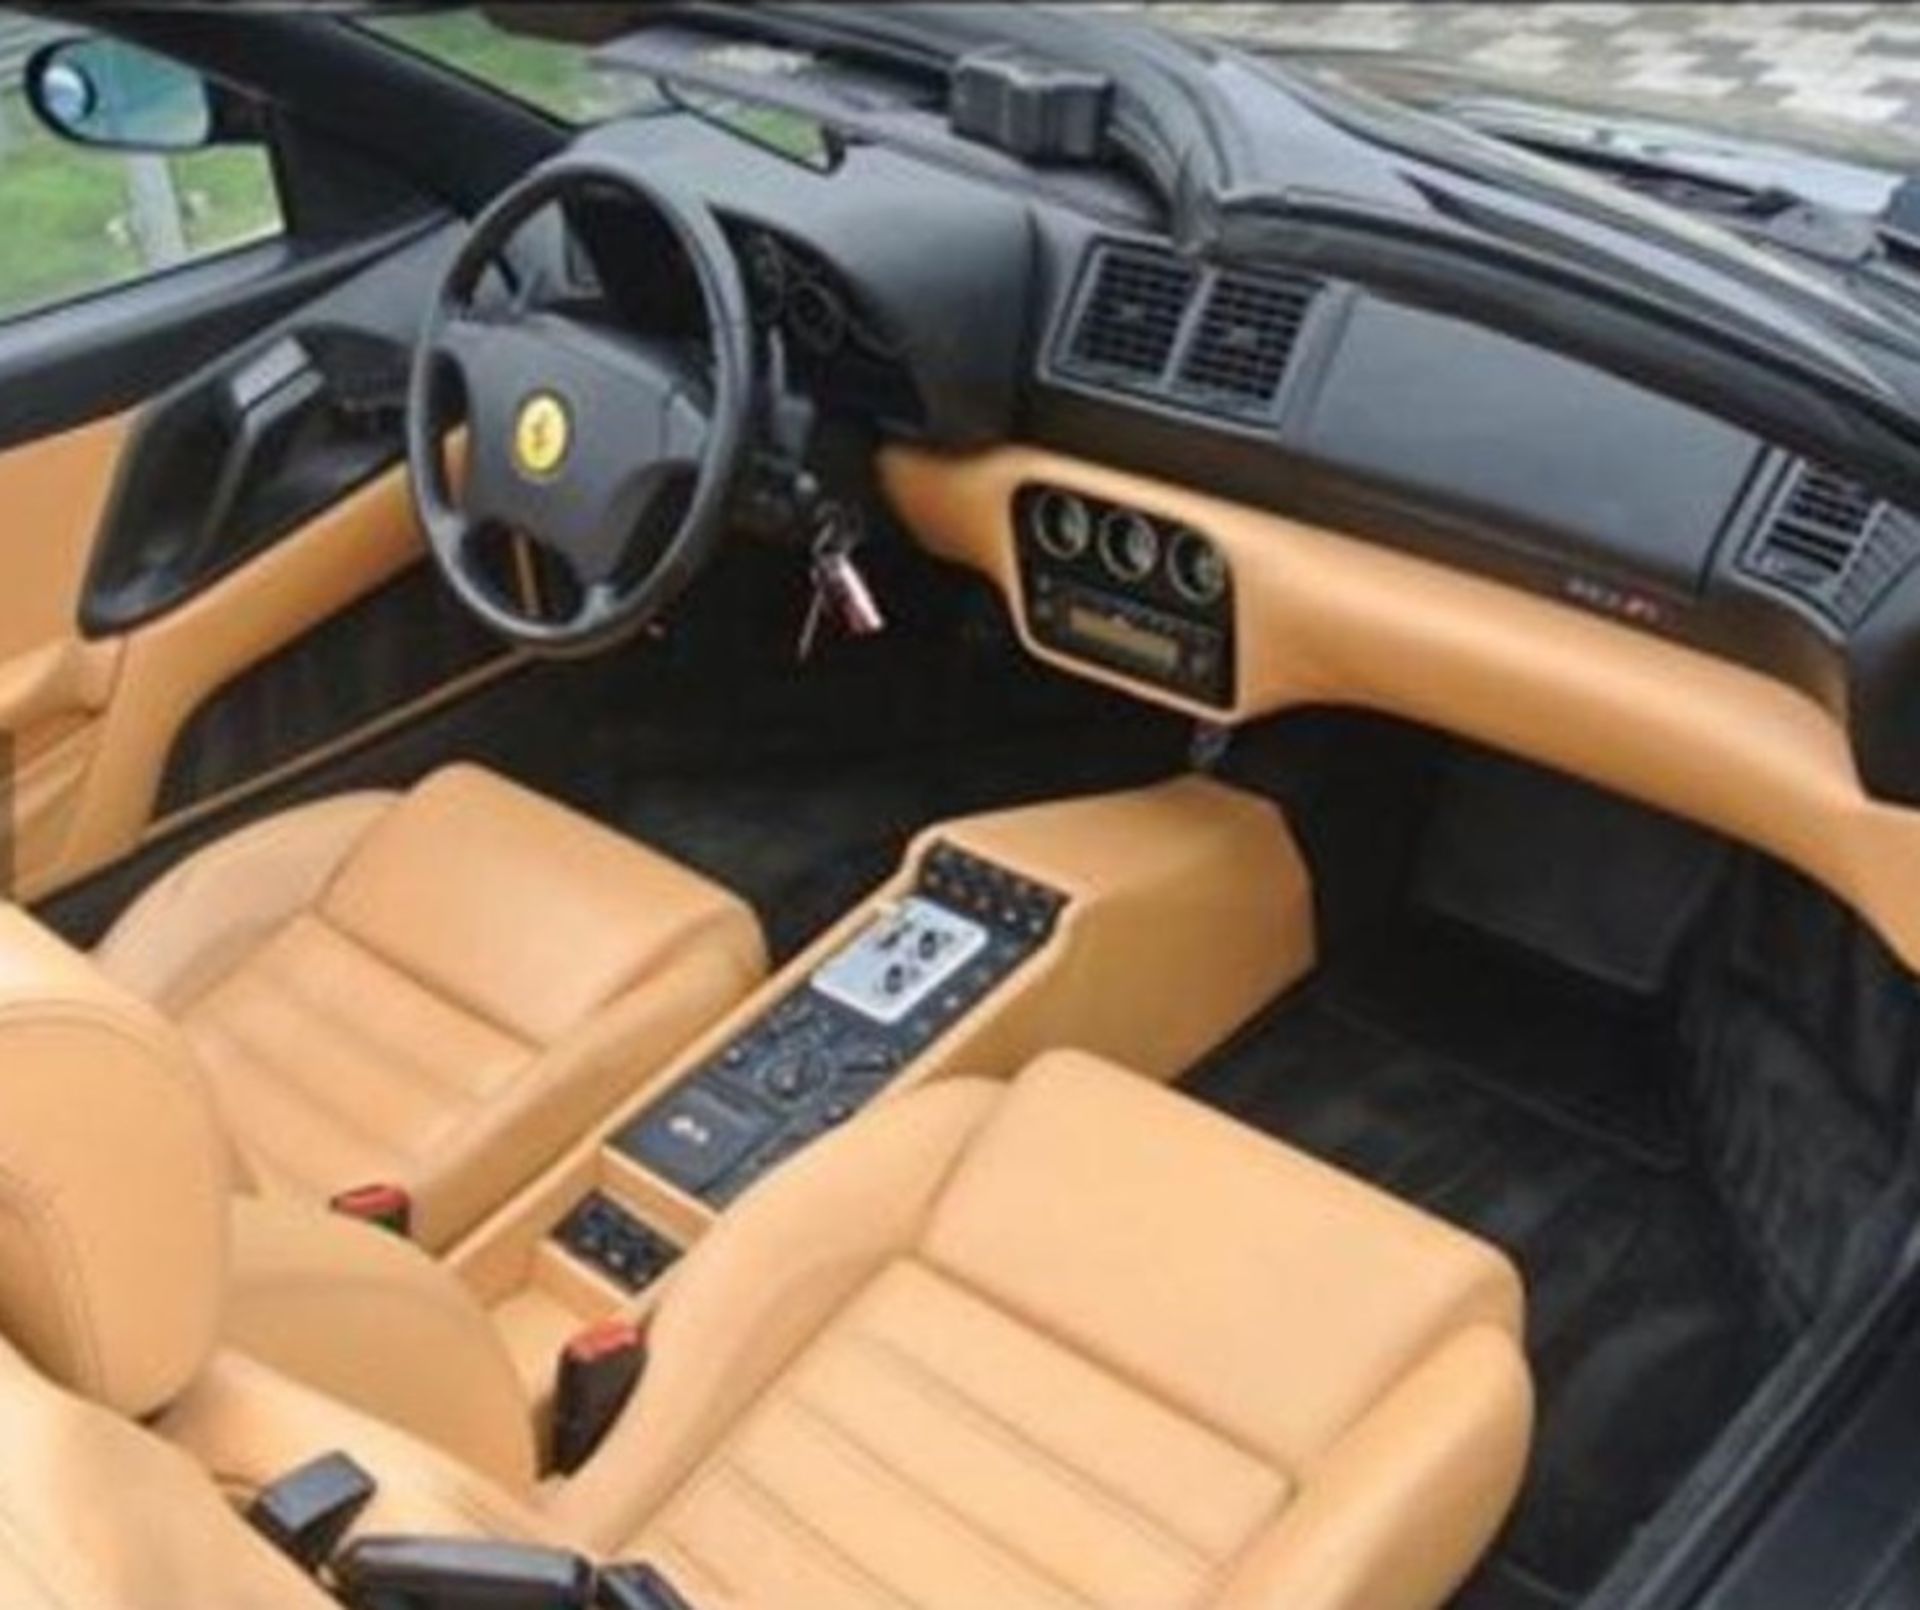 IMMACULATE 1999 FERRARI 355 F1 SPIDER WITH GENUINE LOW MILEAGE & FULL COMPREHENSIVE SERVICE HISTORY - Image 10 of 10